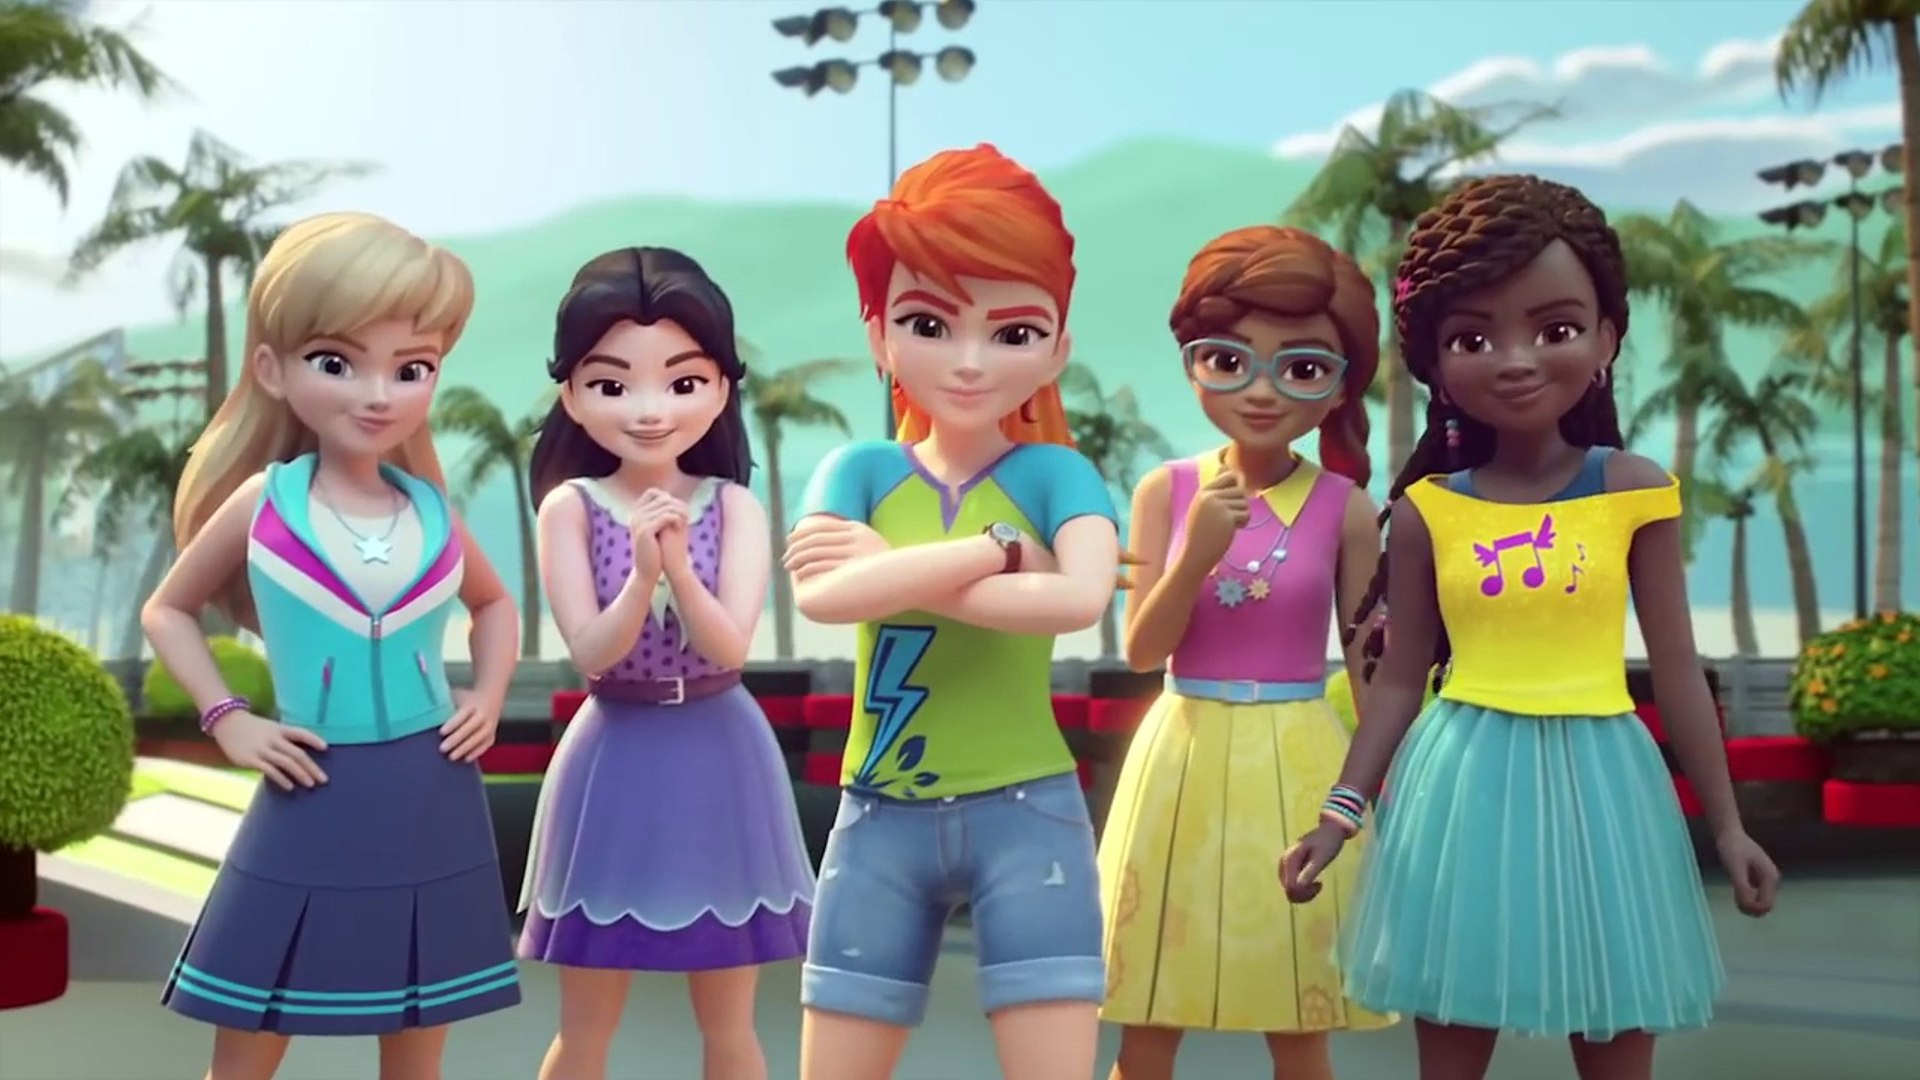 Show LEGO Friends: Girls on a Mission